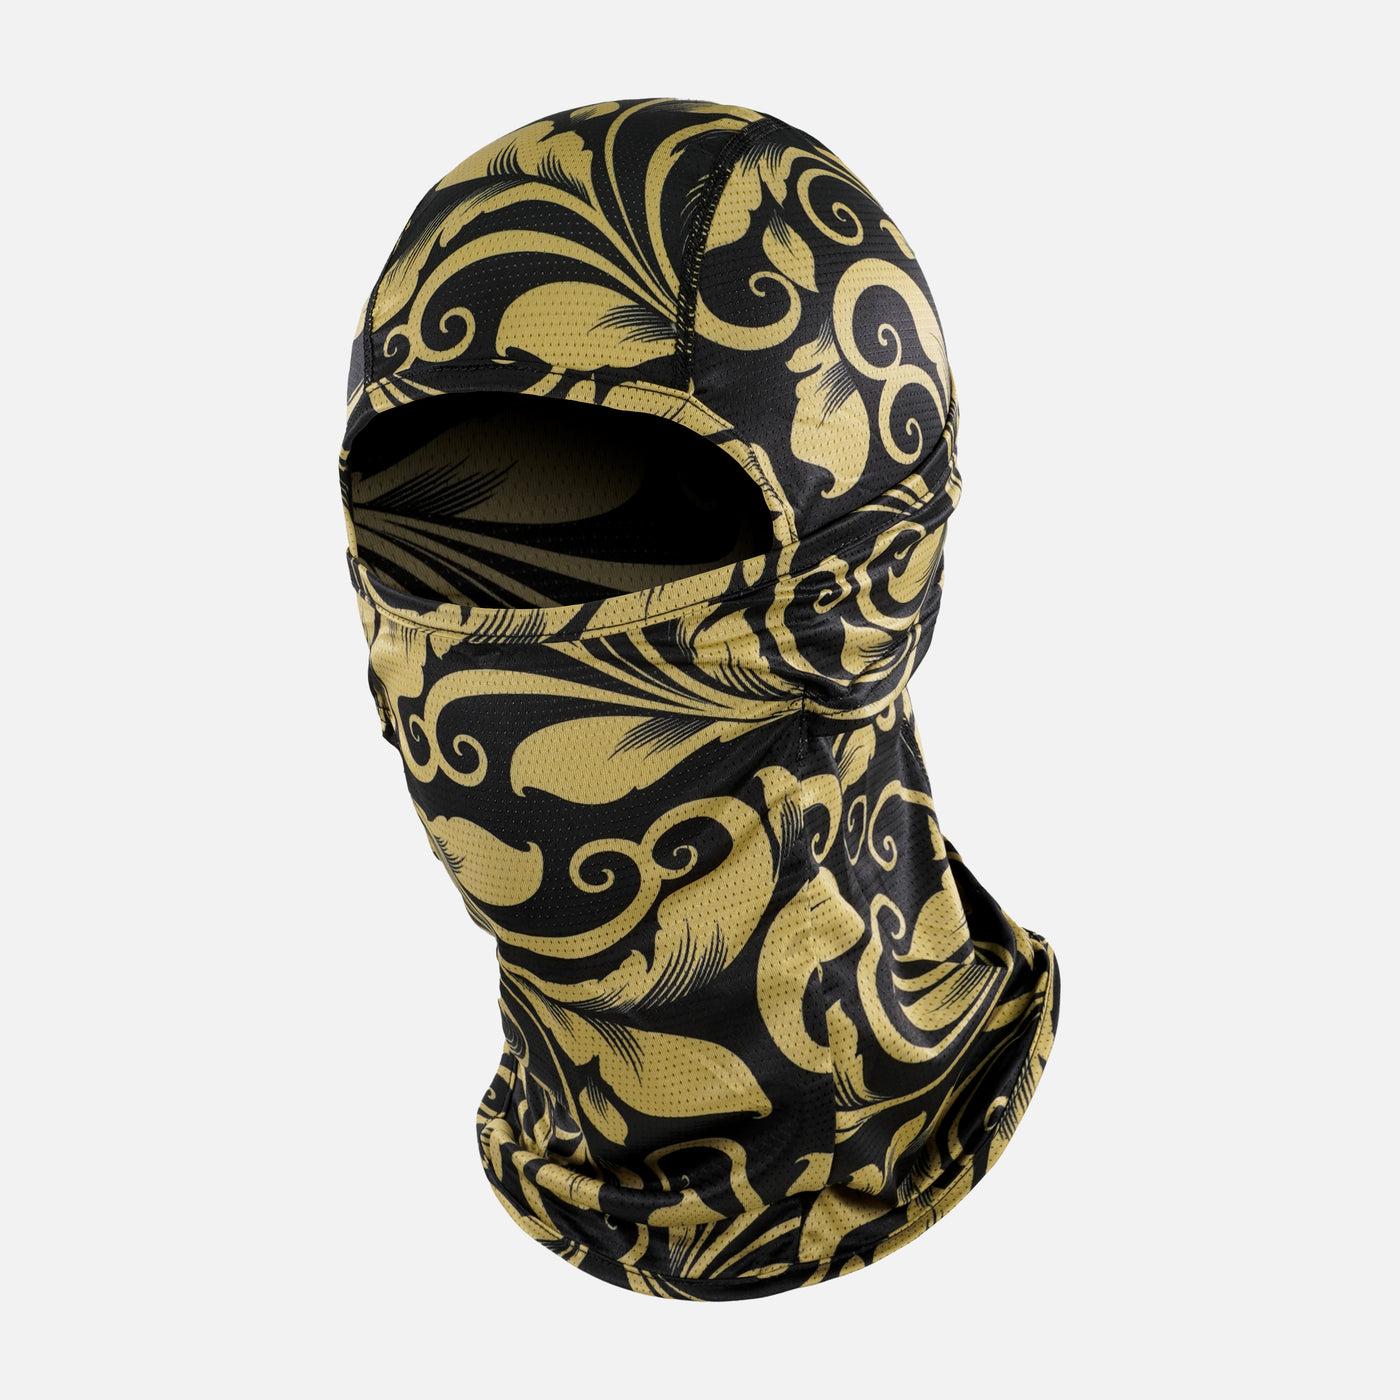 Baroque Old Gold and Black Loose-fitting Shiesty Mask